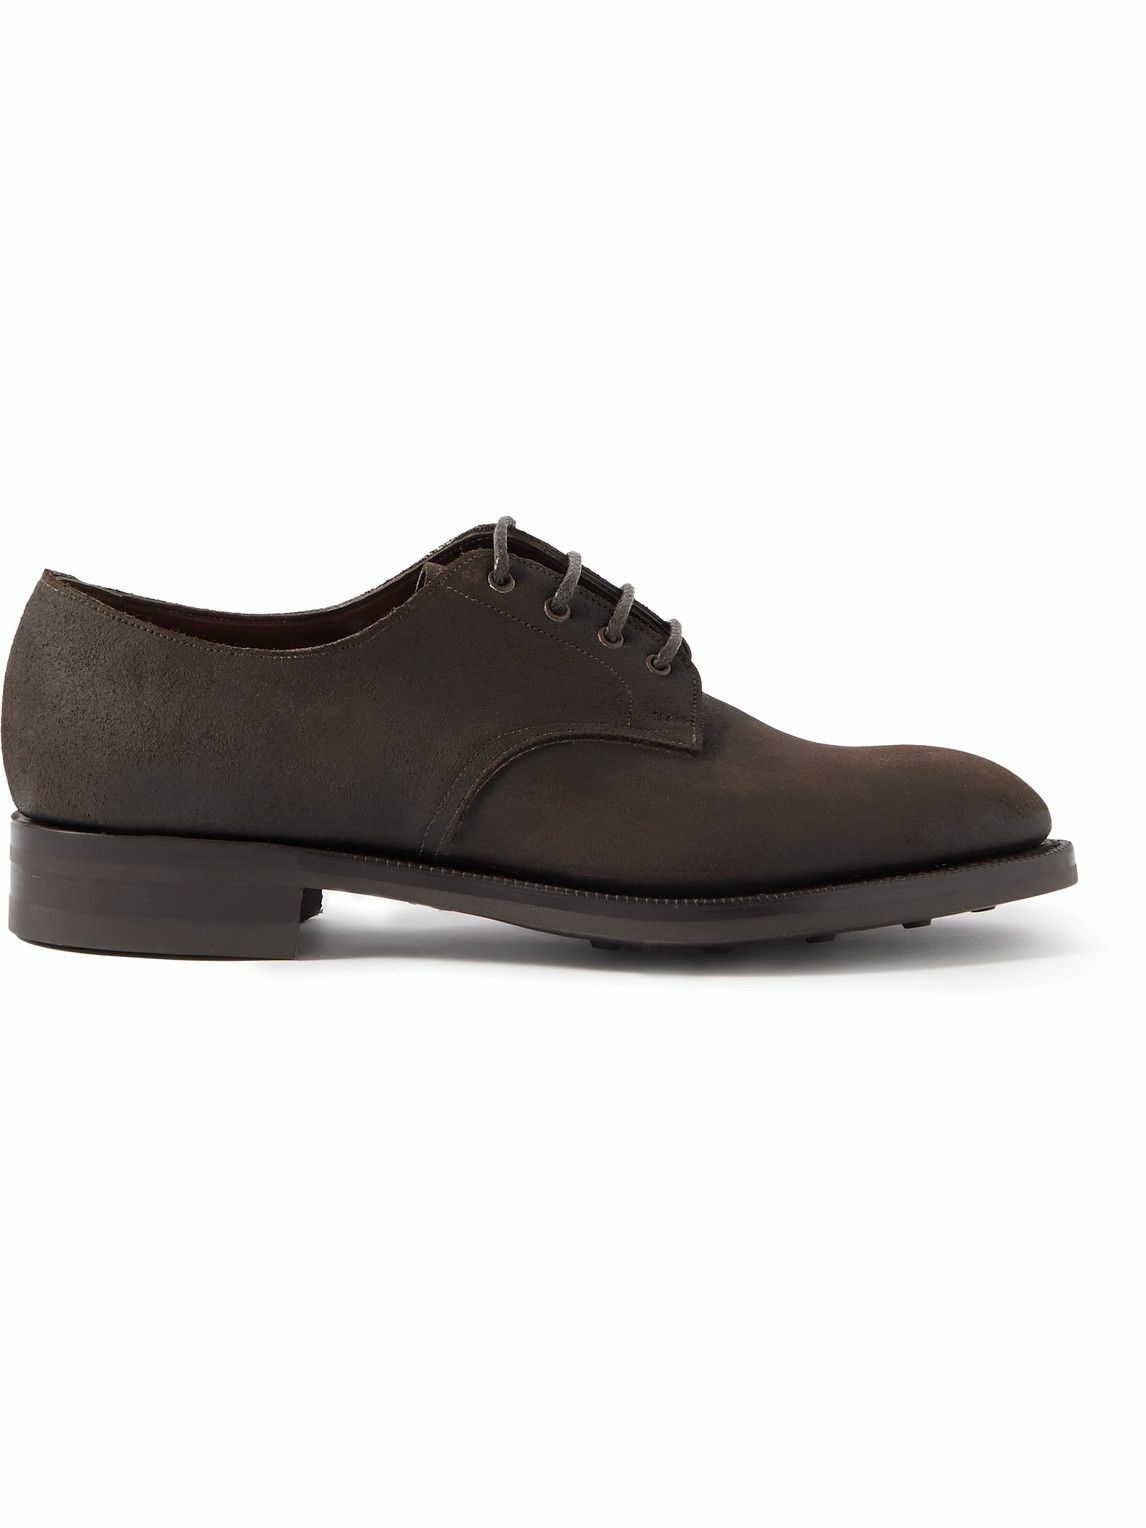 Edward Green - Leith Suede Derby Shoes - Brown Edward Green